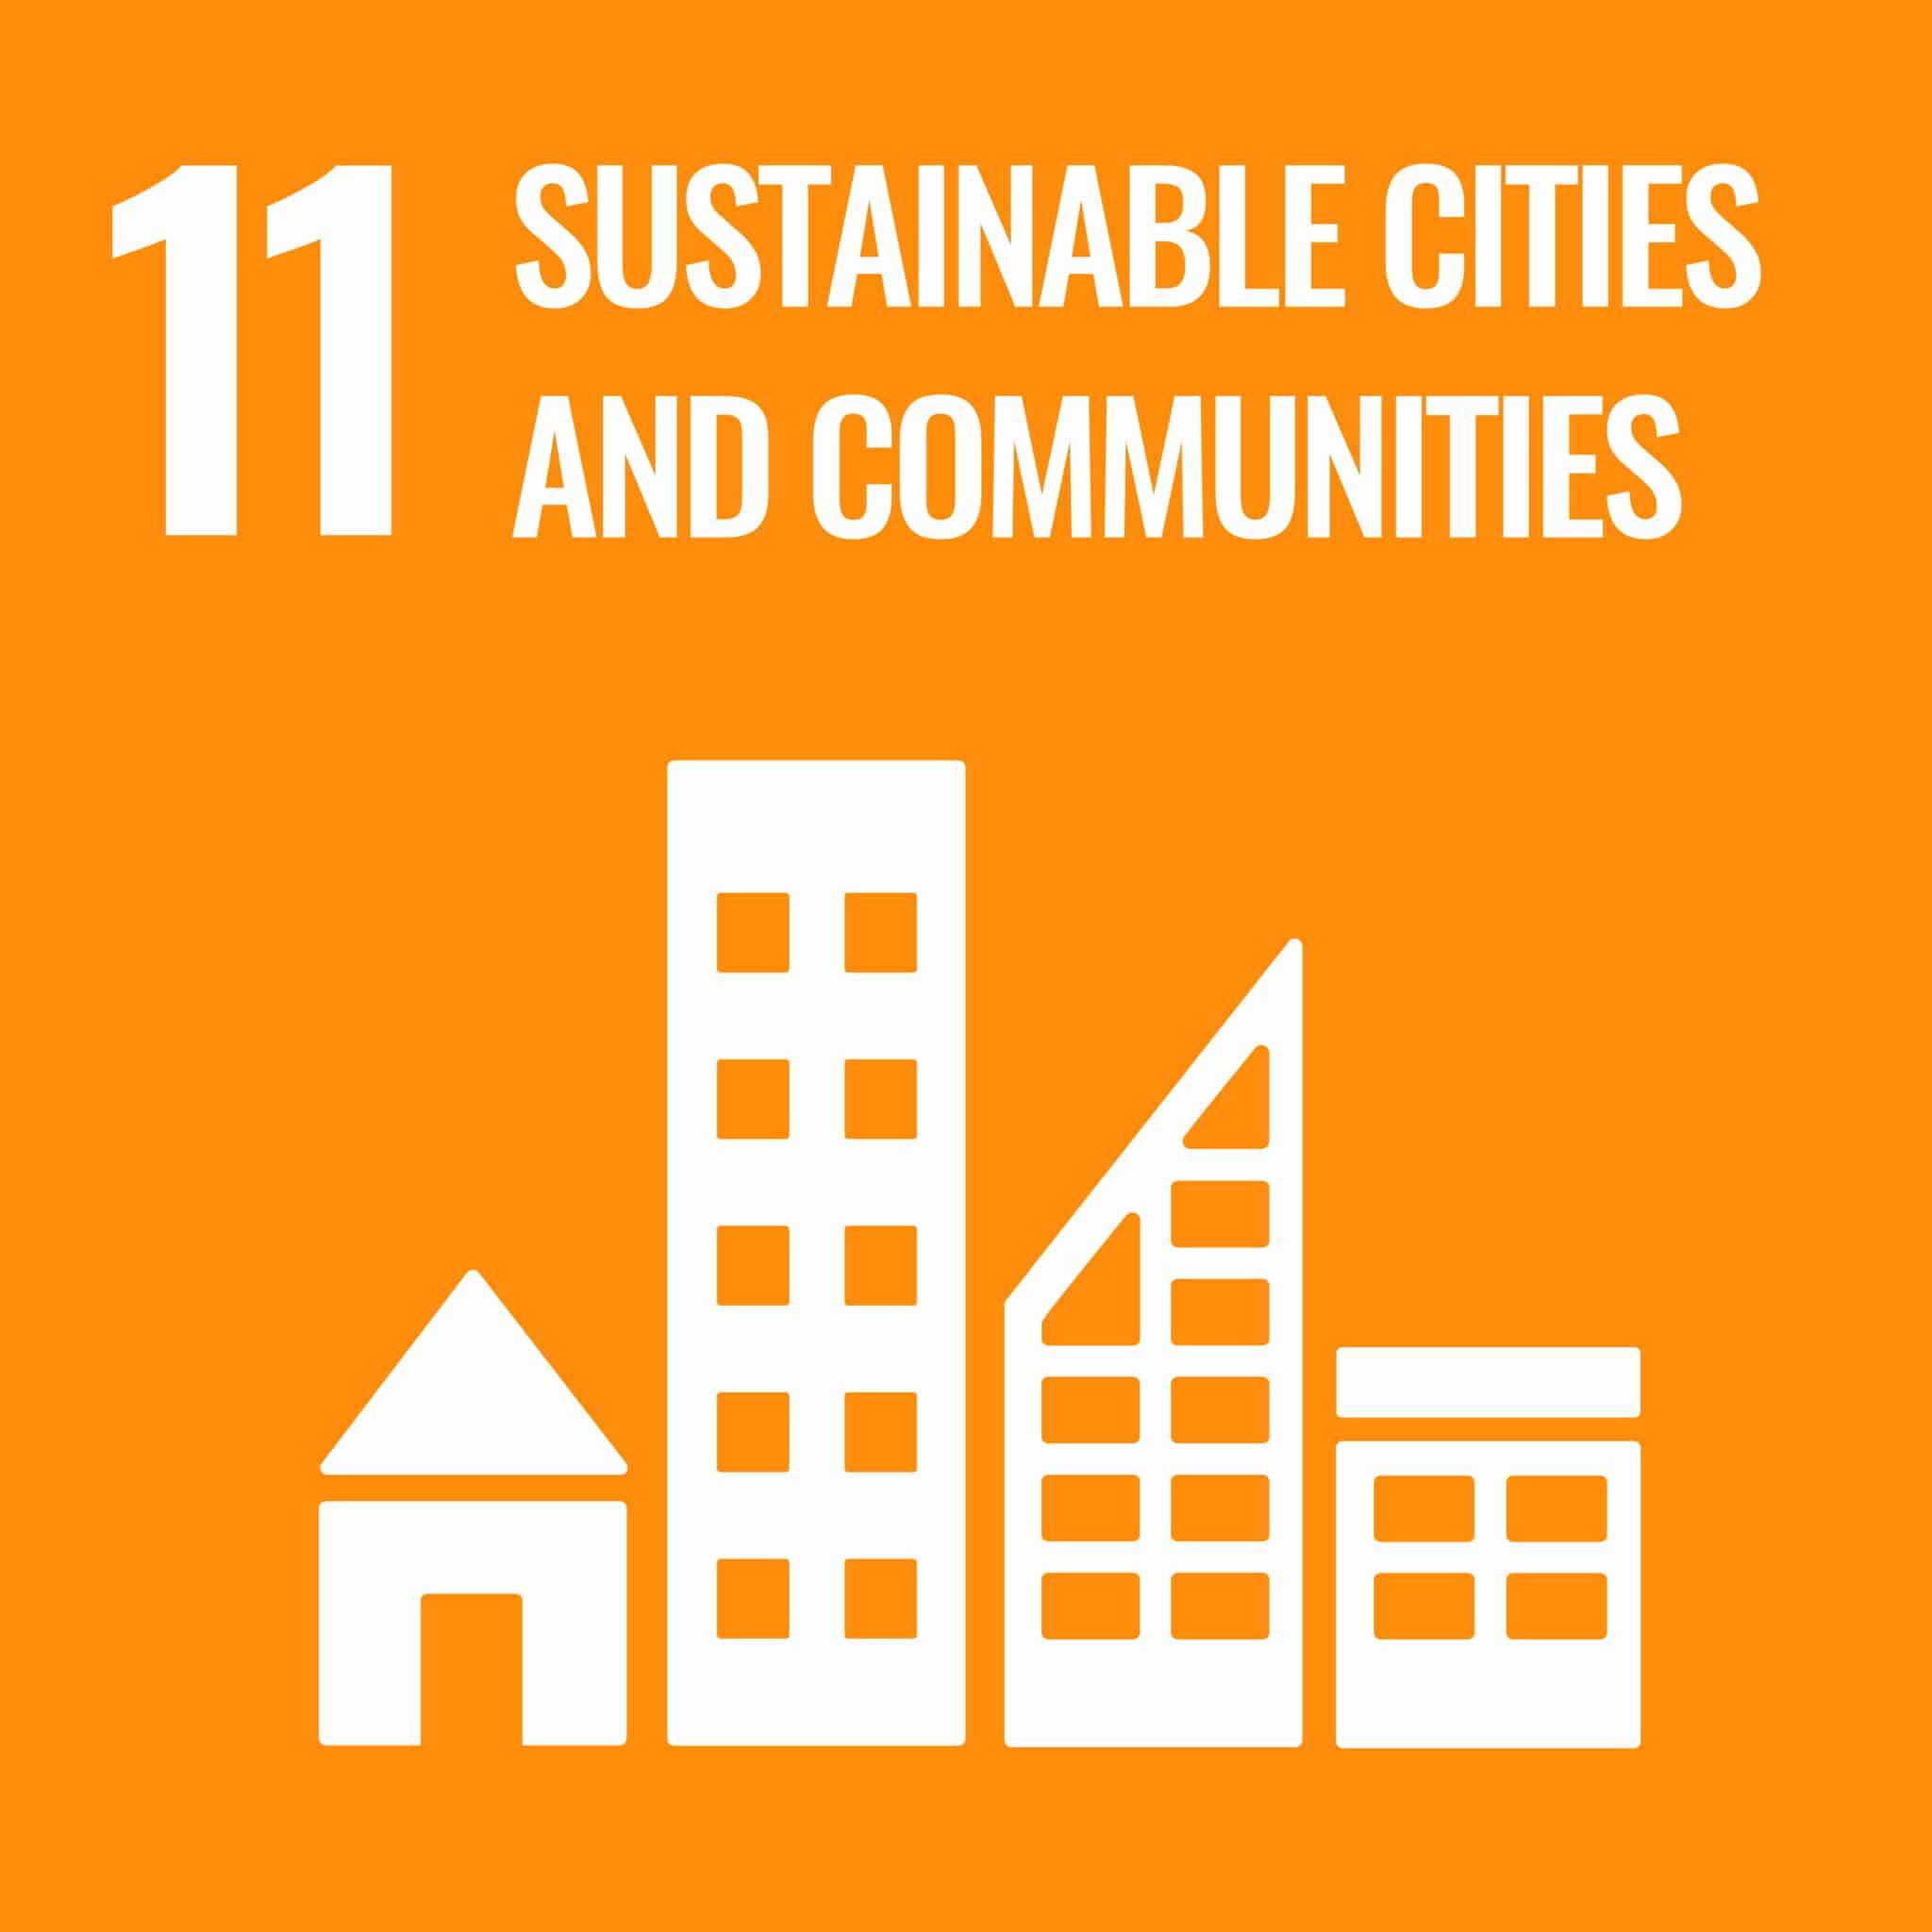 11-Sustainable cities and communities